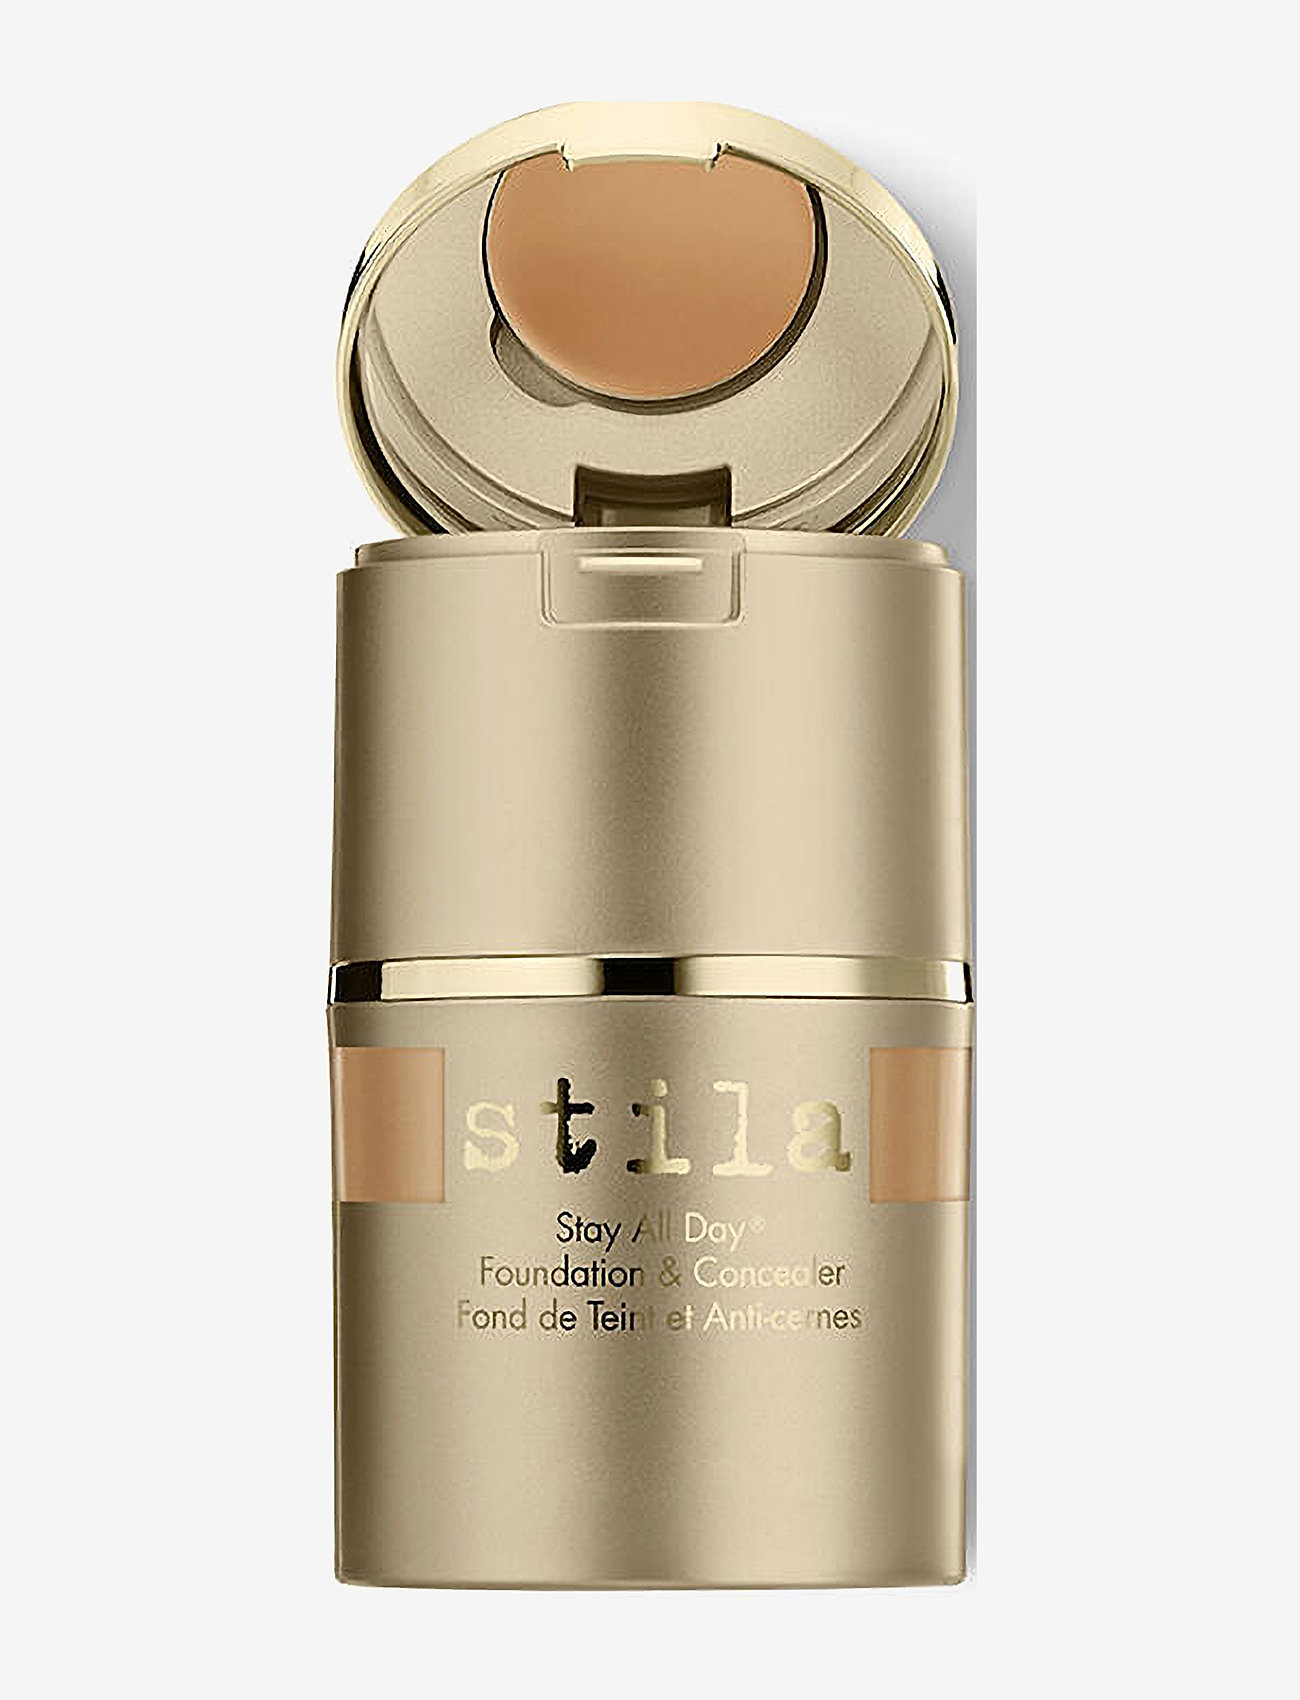 Stila - Stay All Day Foundation & Concealer Hue 5 - party wear at outlet prices - hue 5 - 0